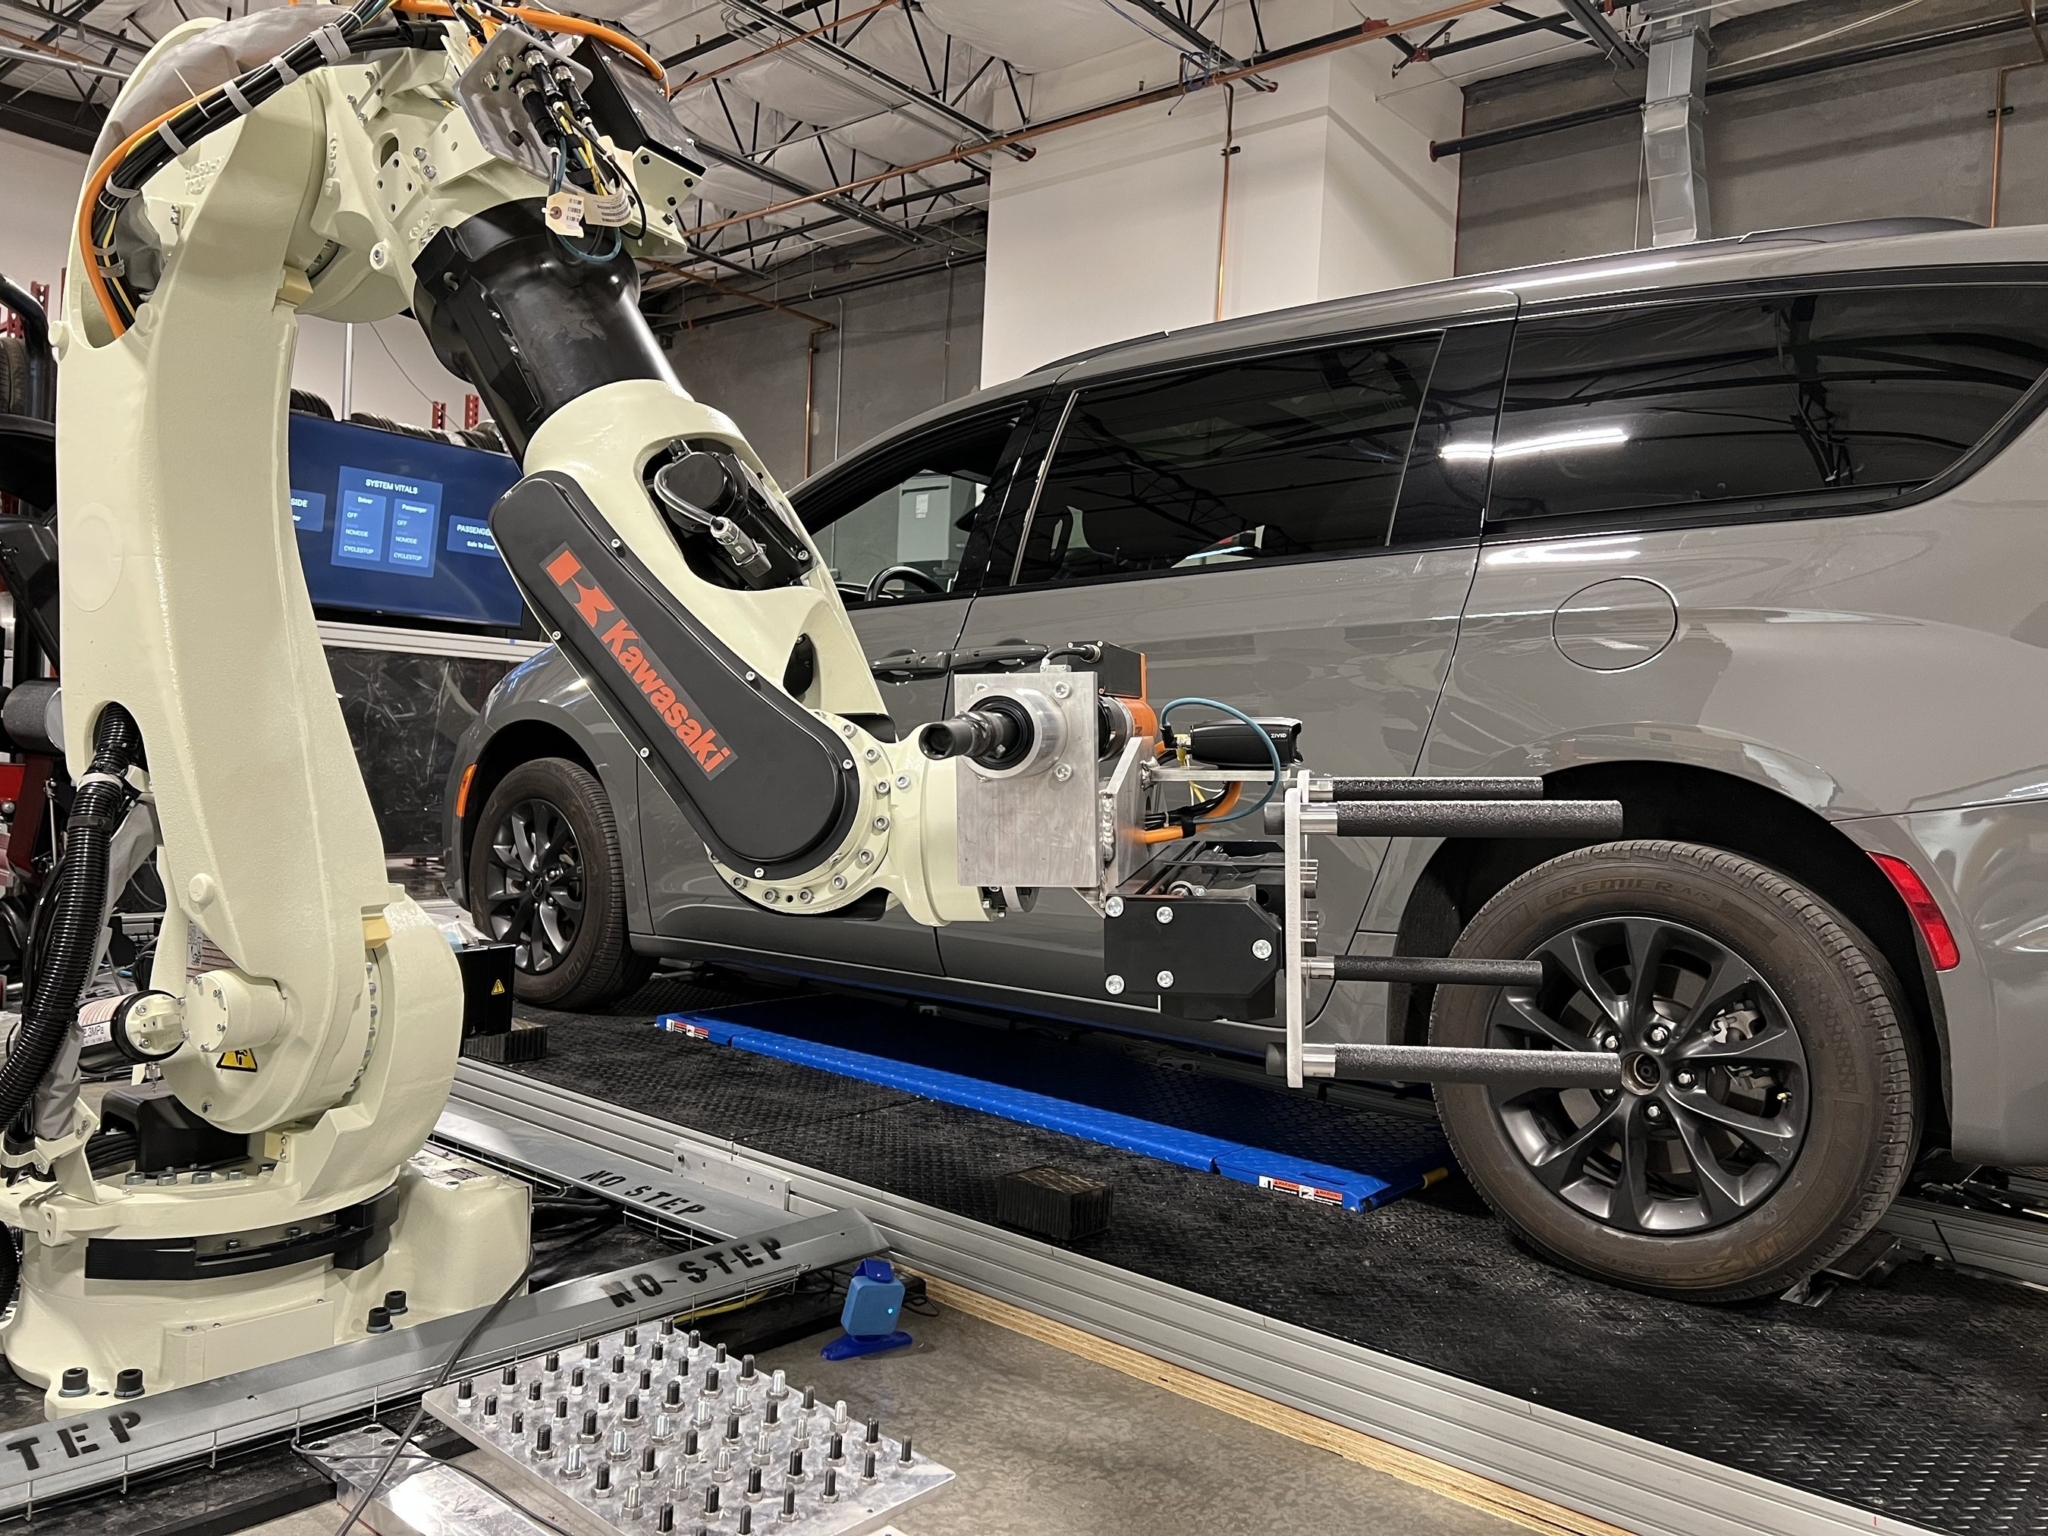 Discount Tire-backed RoboTire automated tyre changing system raises $7.5 million